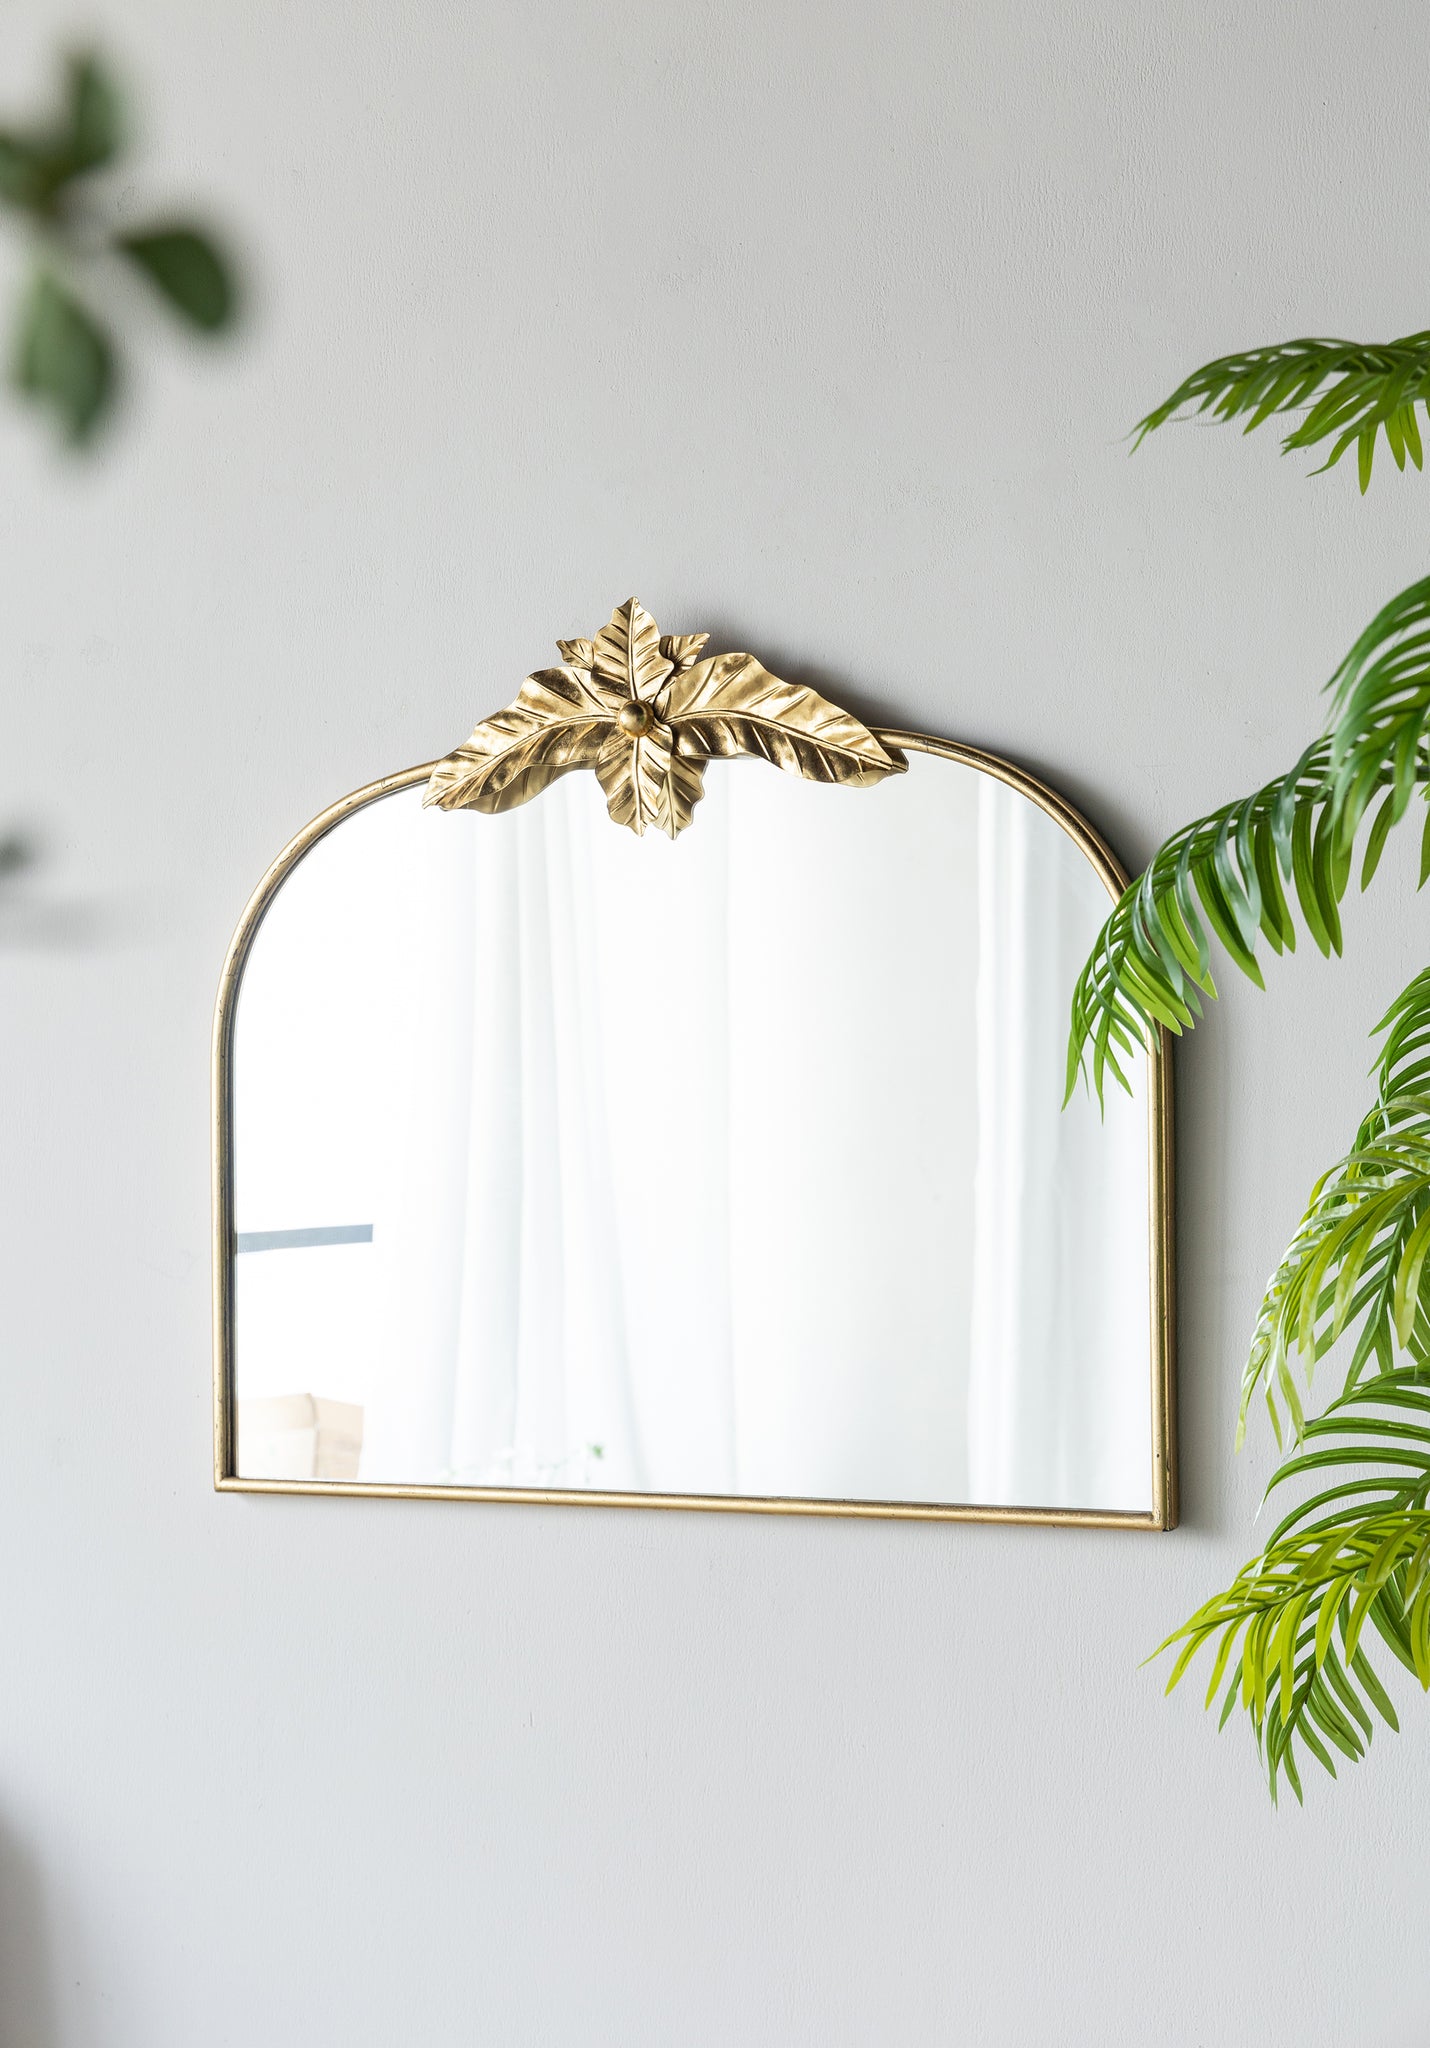 39.5" x 35" Gold Arched Mirror with Metal Frame, Wall gold-iron